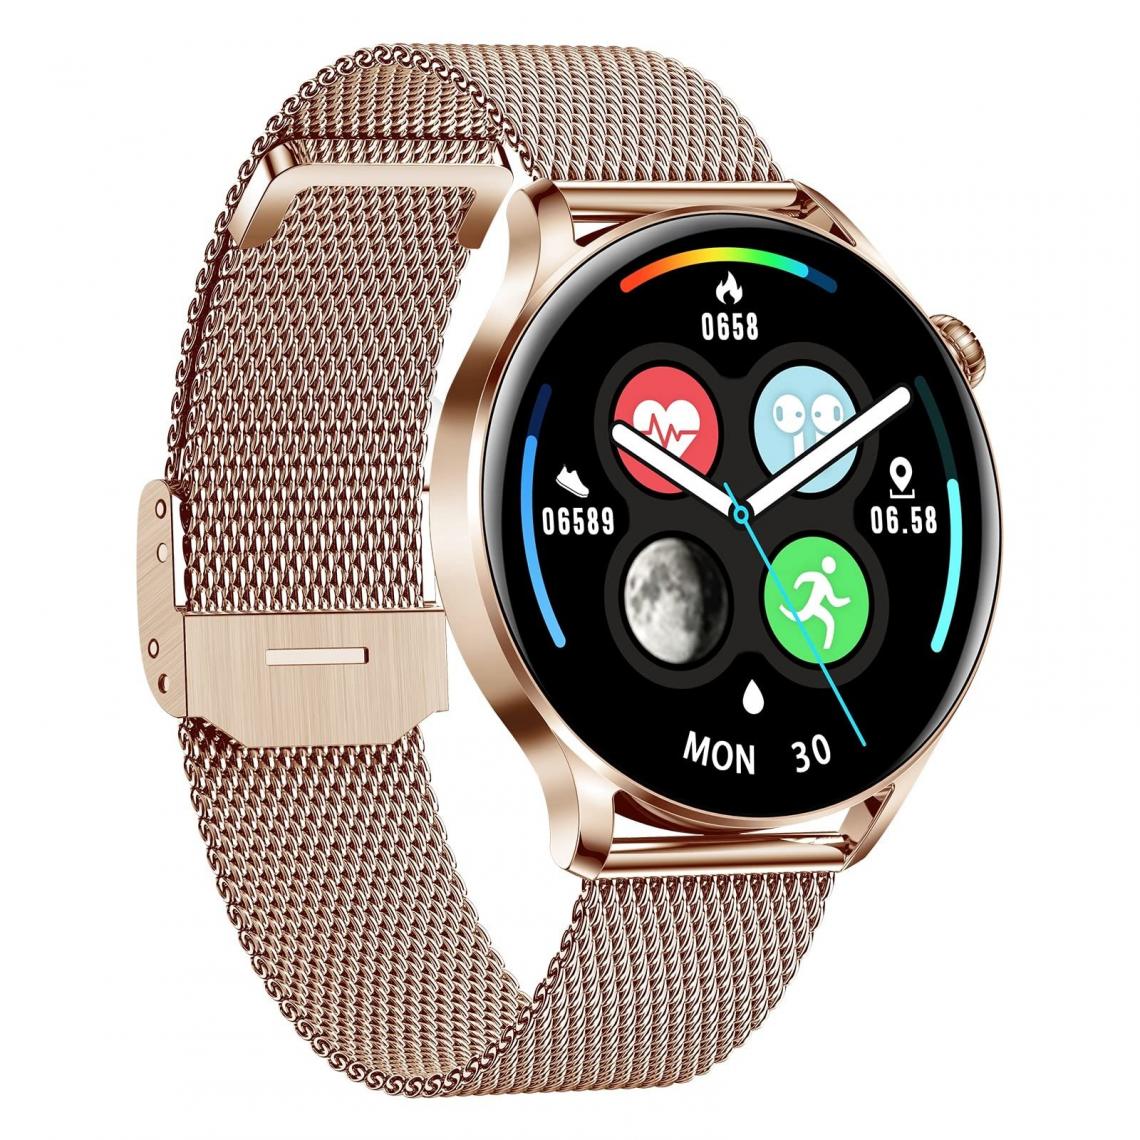 Chronotech Montres - Chronus Smart Watch for Android Phones Ios, Fitness Tracker Watch with Bluetooth Call Music Player IP67 Waterproof Smart Watch Pedometer Calories for Women Men Smartwatch(gold) - Montre connectée